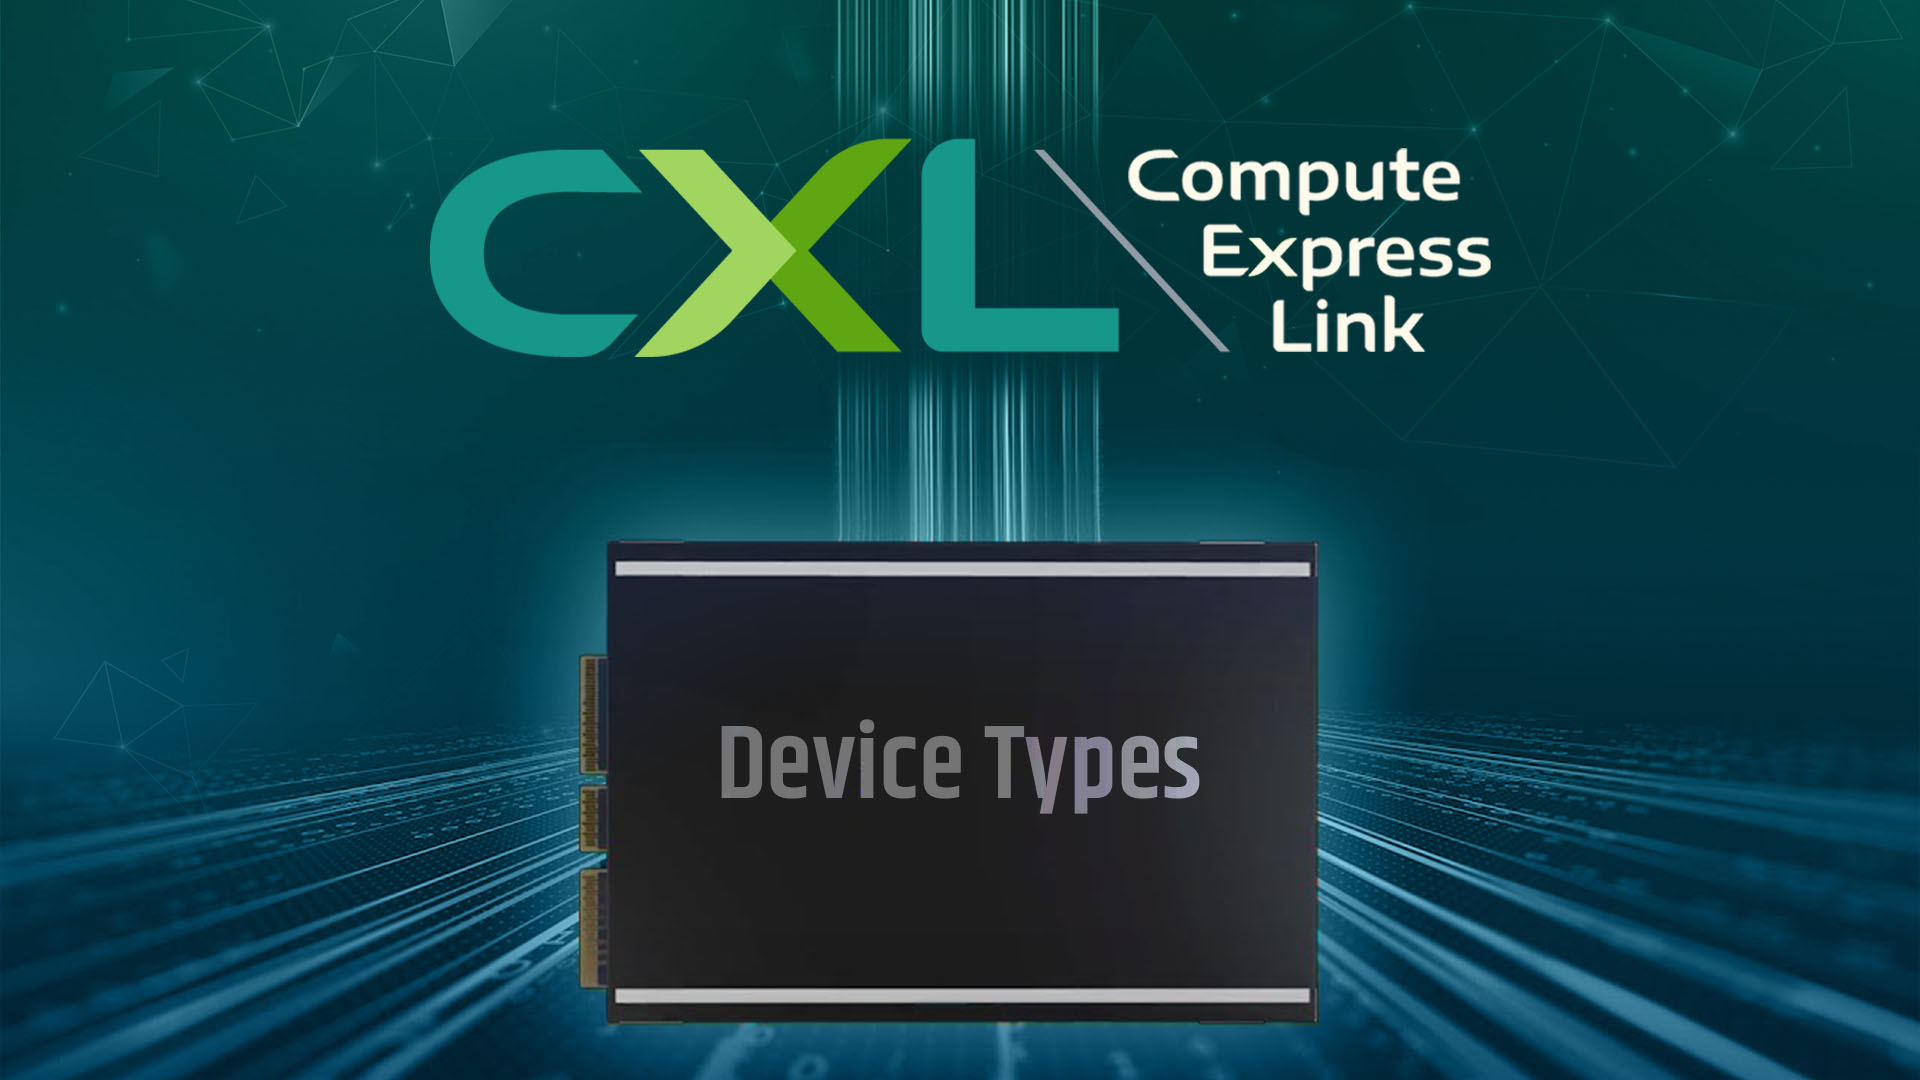 Compute Express Link (CXL): Device Types